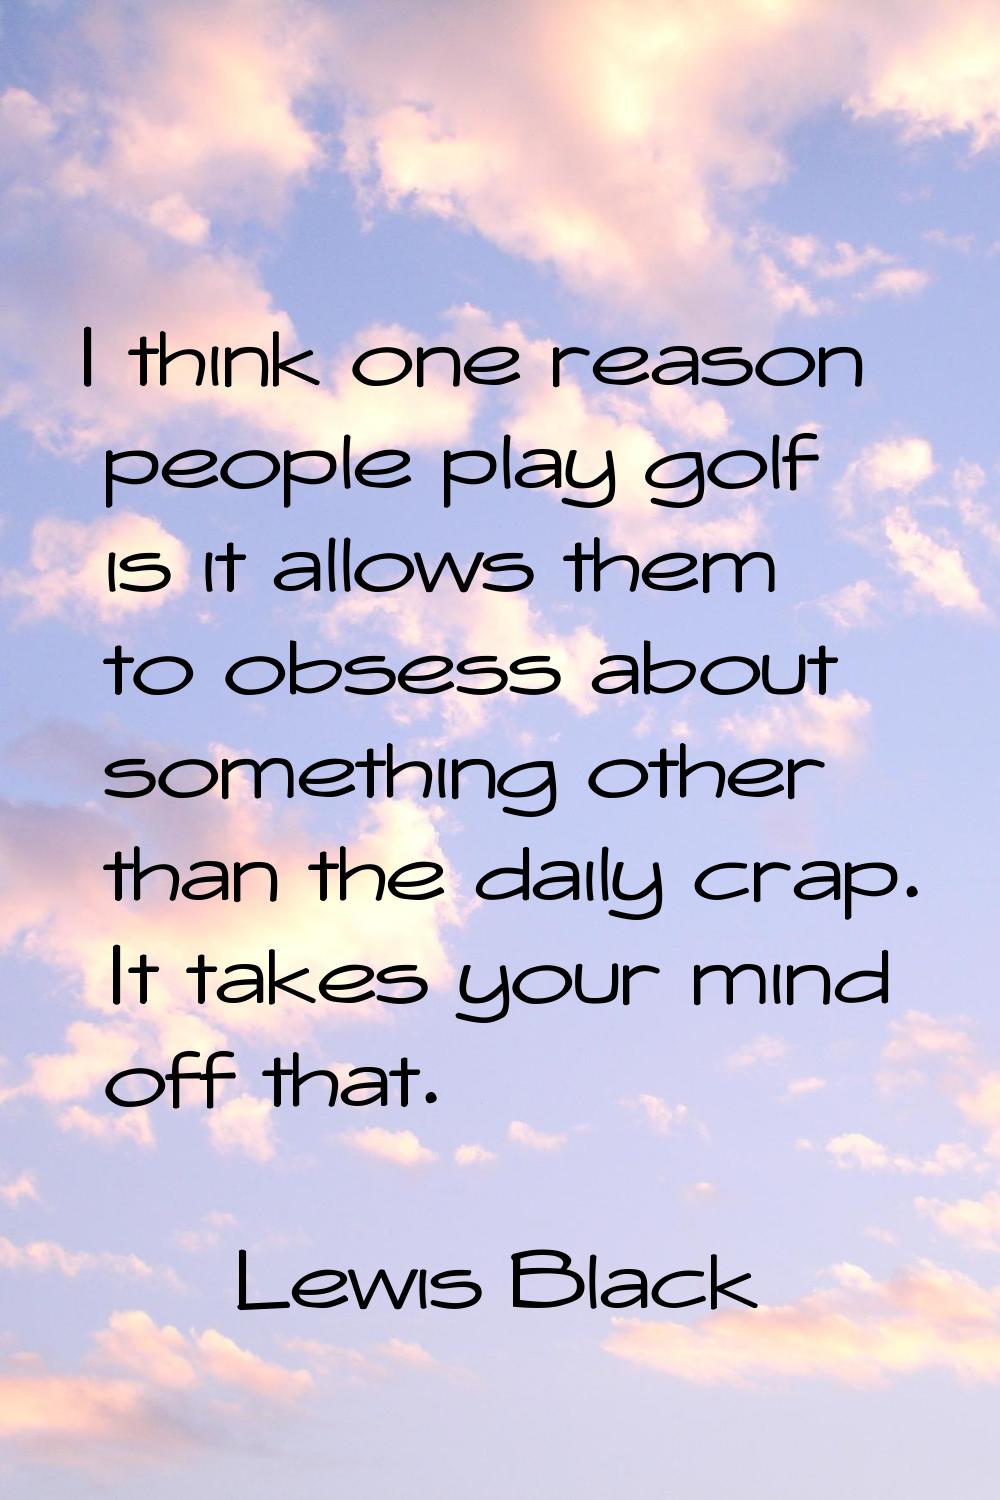 I think one reason people play golf is it allows them to obsess about something other than the dail